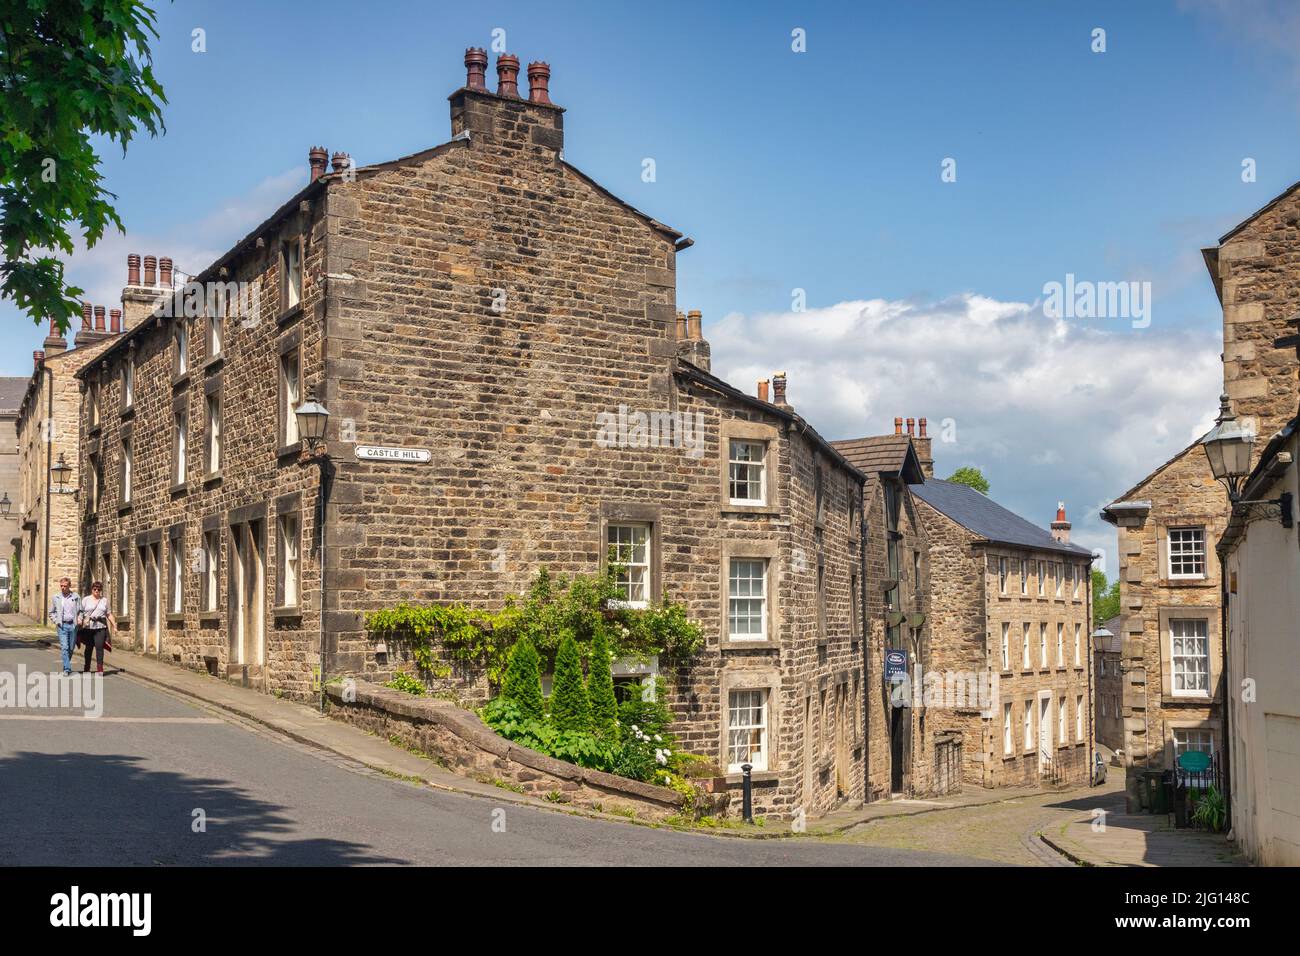 12 July 2019:Lancaster, UK - Victorian terraced houses in the Castle Hill area of Lancaster on a beautiful summer day. Stock Photo